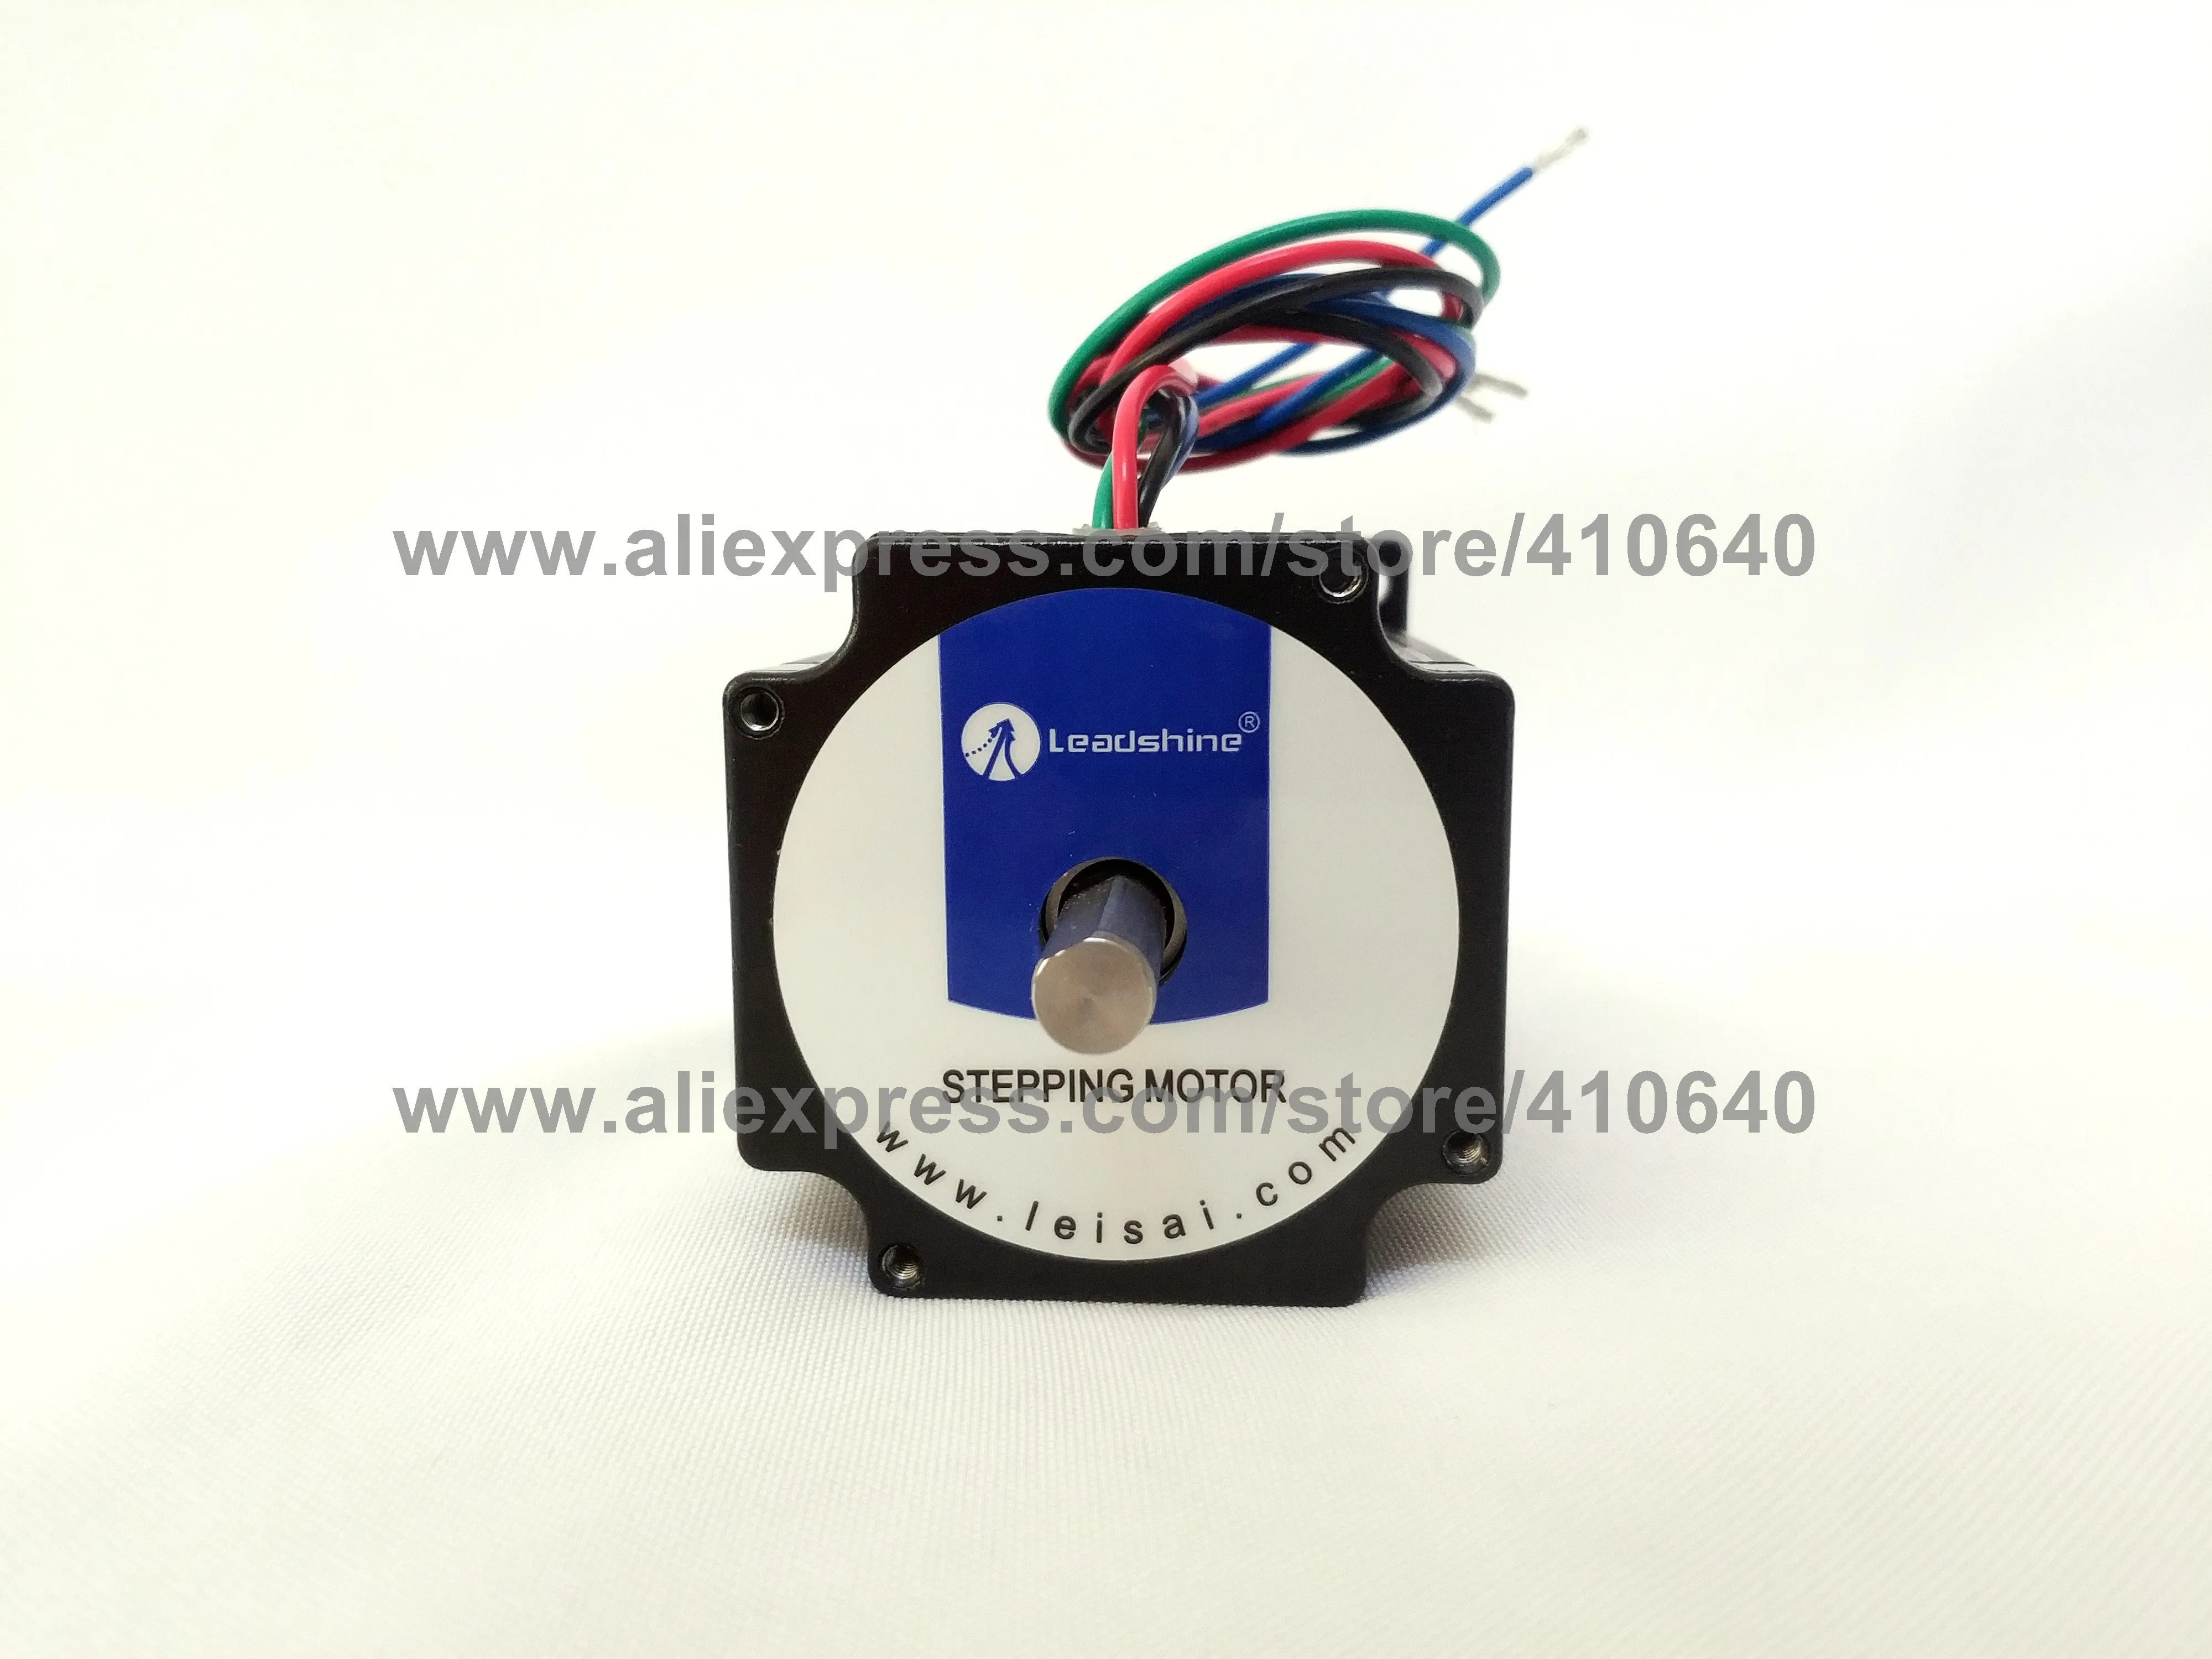 Leadshine Stepper Motor 57HS22-C 4 Wires  (14)